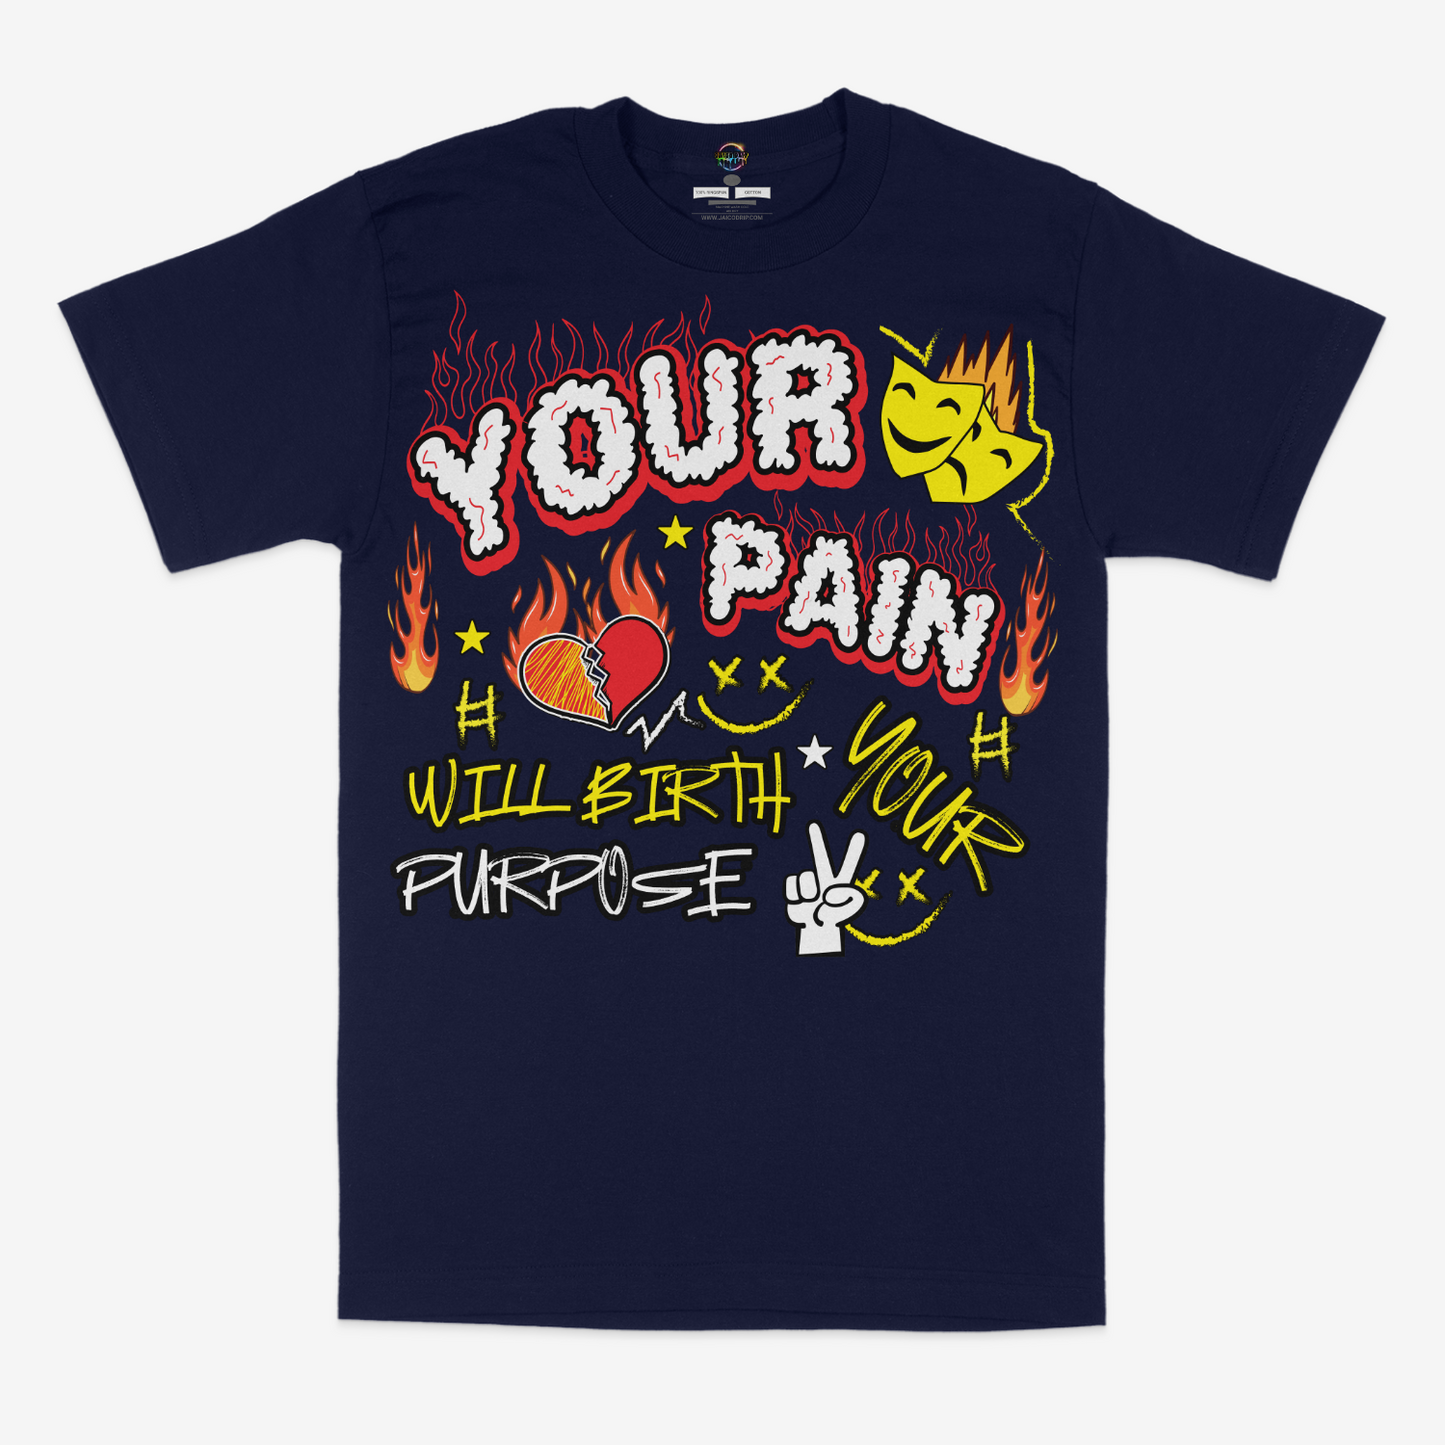 Your Pain Will Birth Your Purpose Graphic Unisex T-shirt